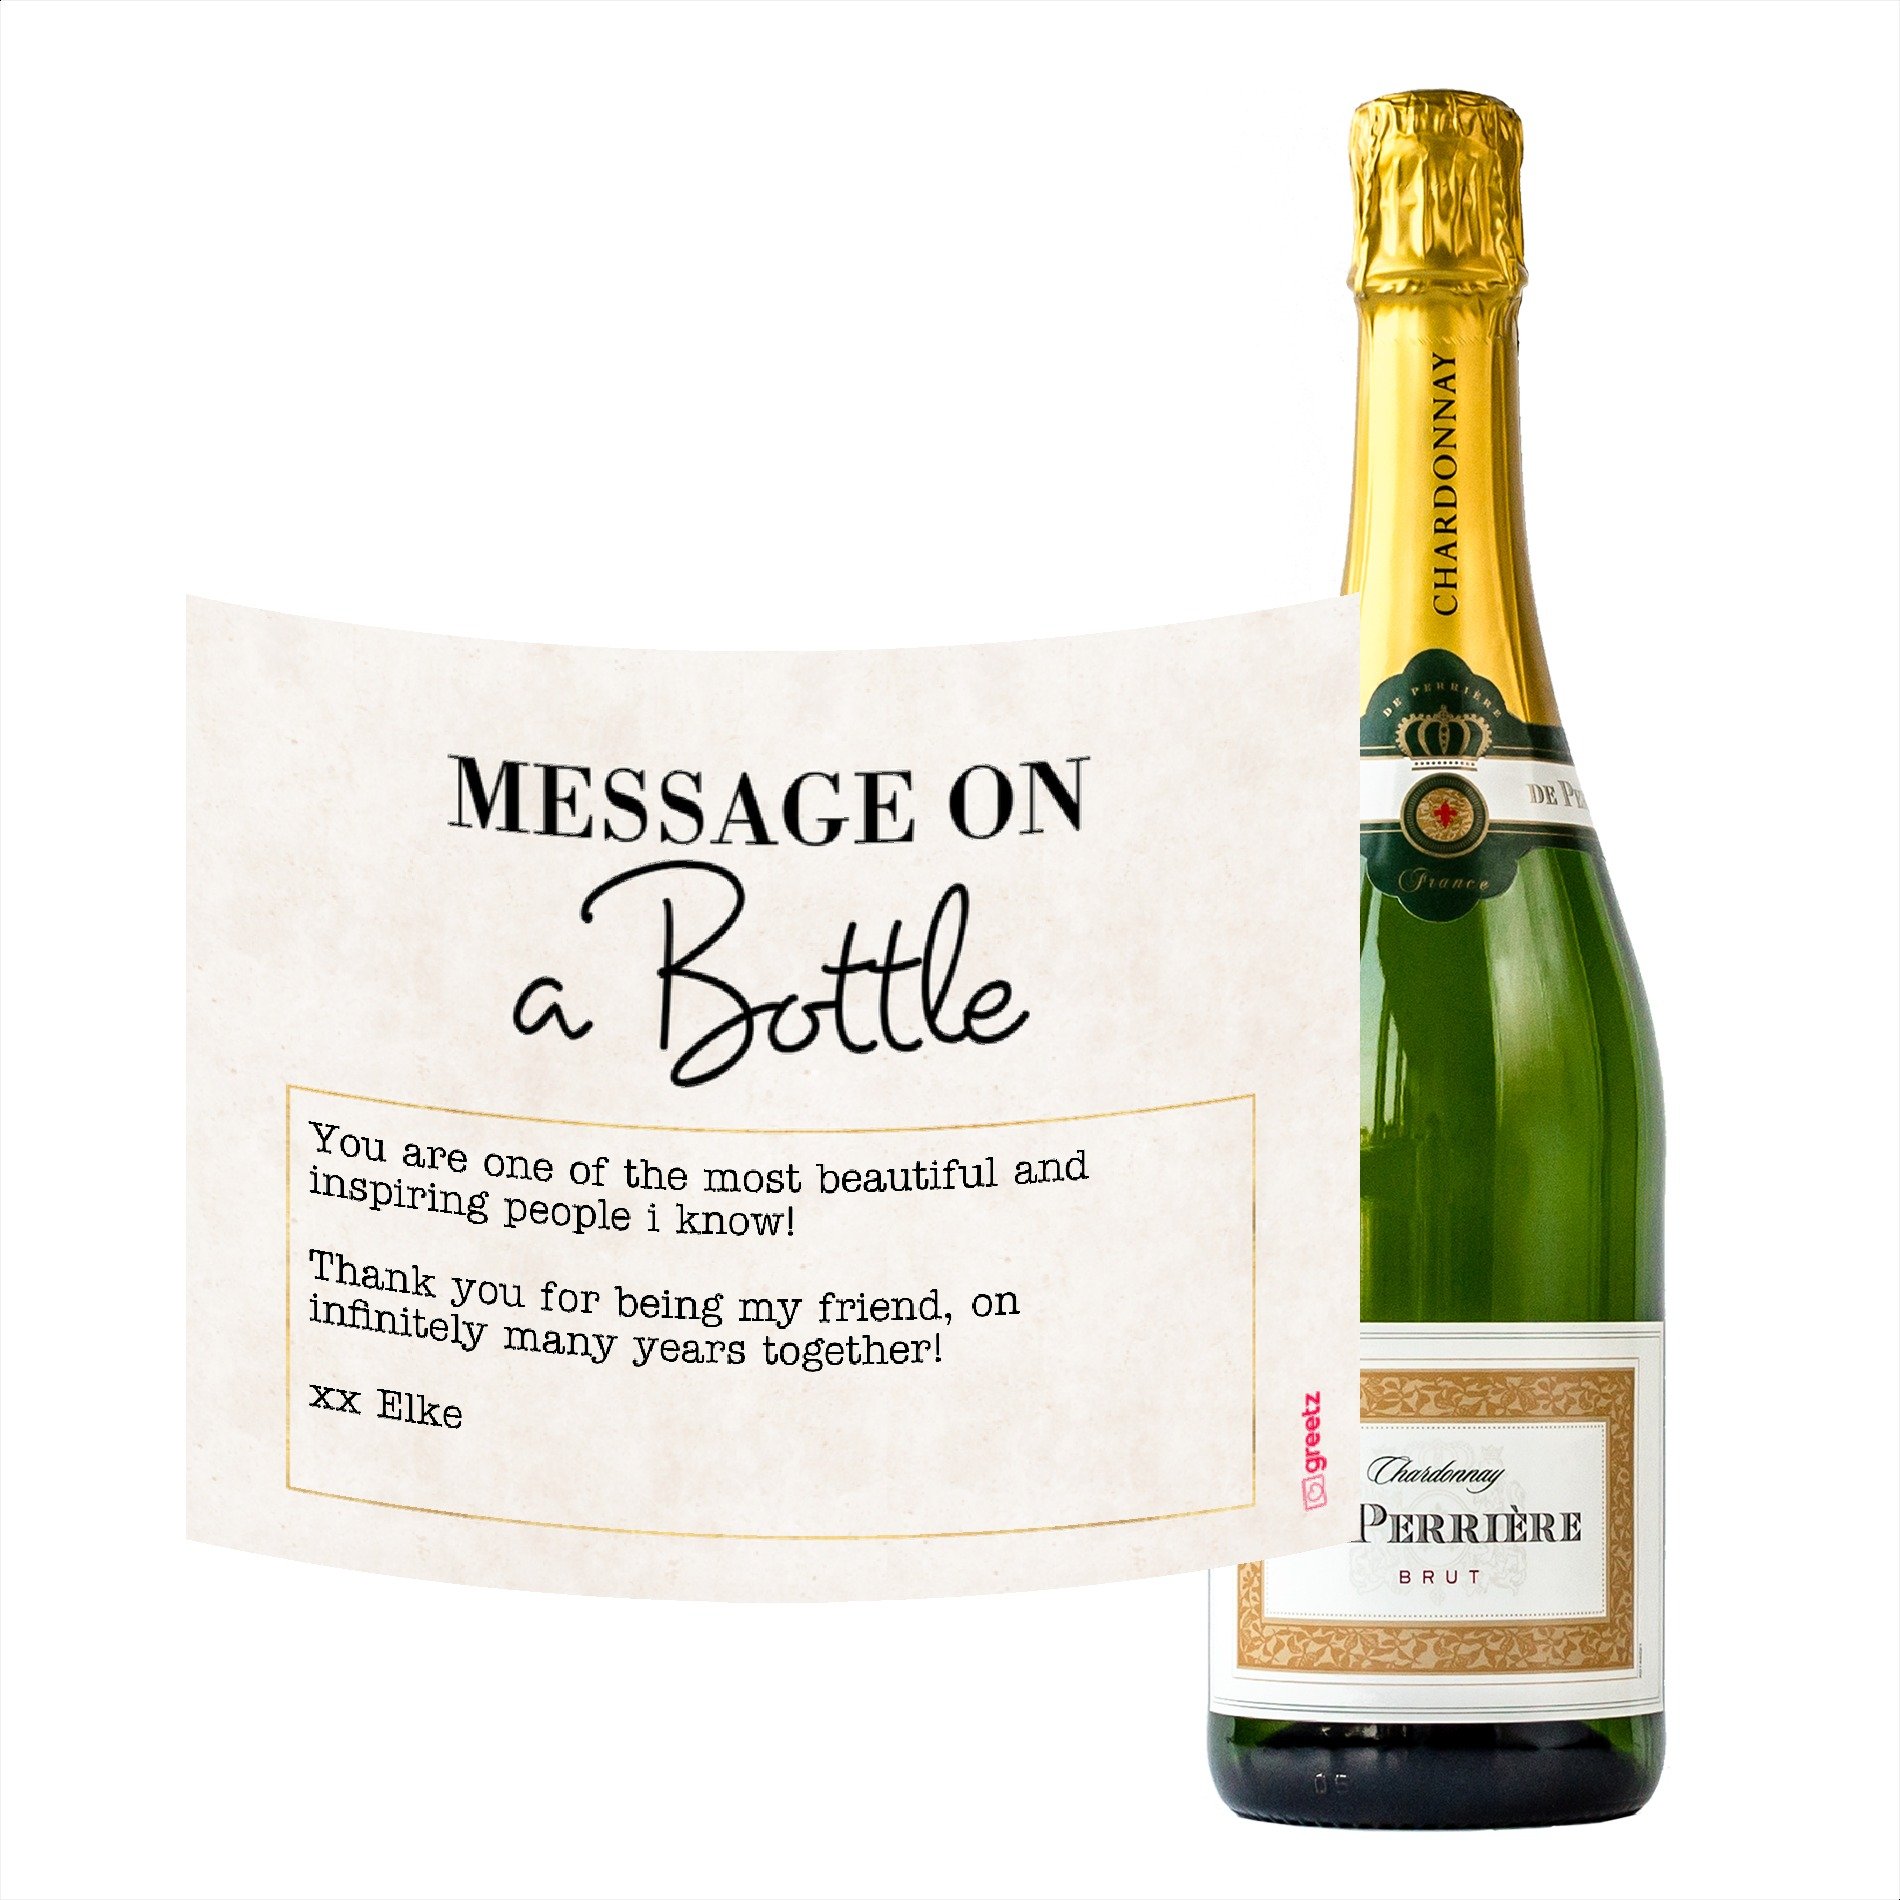 Perriere - Brut Chardonnay - Message on a bottle - 750ml